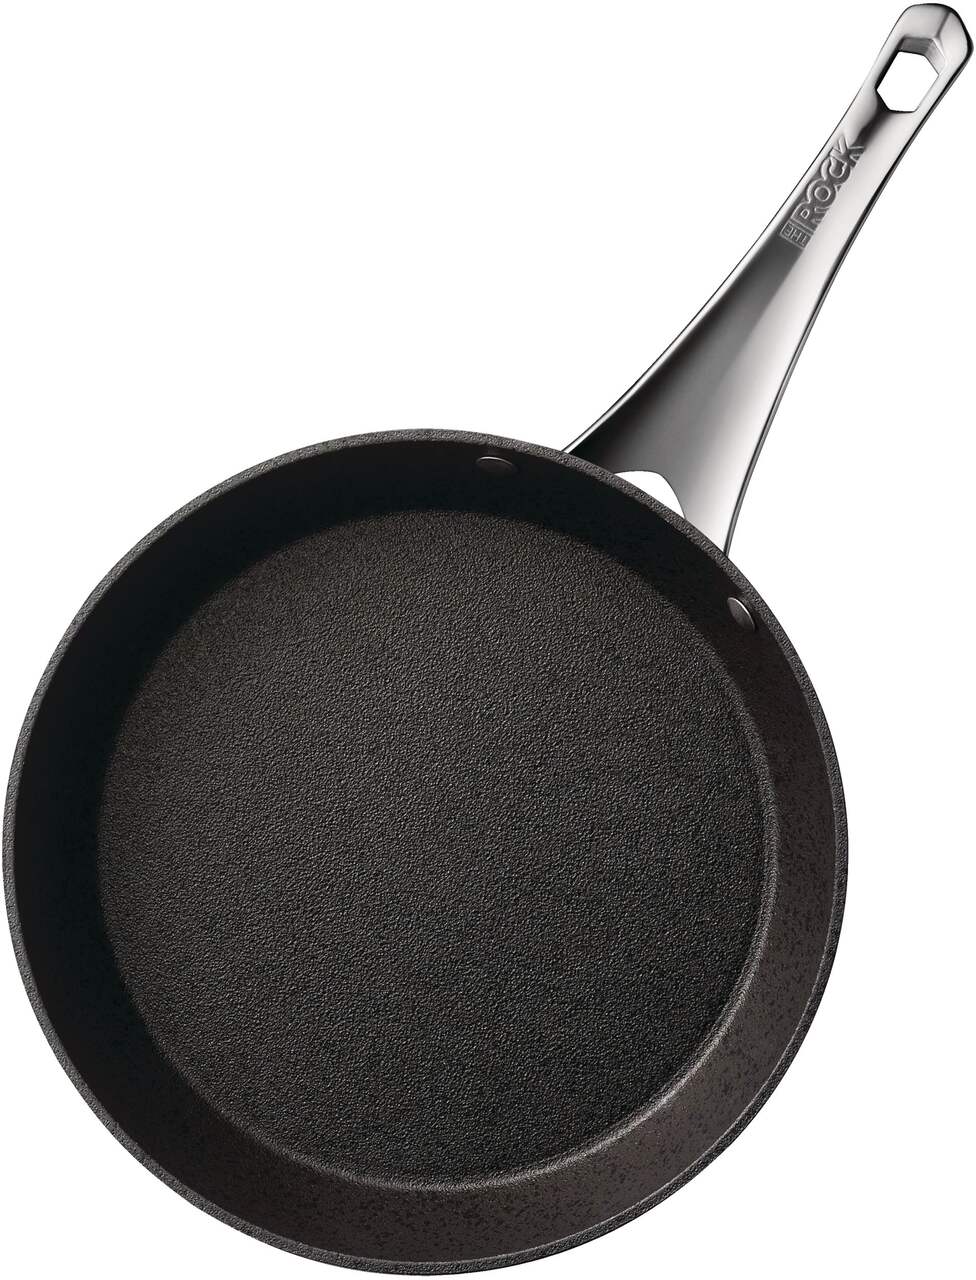 https://media-www.canadiantire.ca/product/living/kitchen/cookware/1429421/20cm-rock-diamond-frypan-b3050565-2b7a-4f42-a2b5-5e9a80321695-jpgrendition.jpg?imdensity=1&imwidth=640&impolicy=mZoom